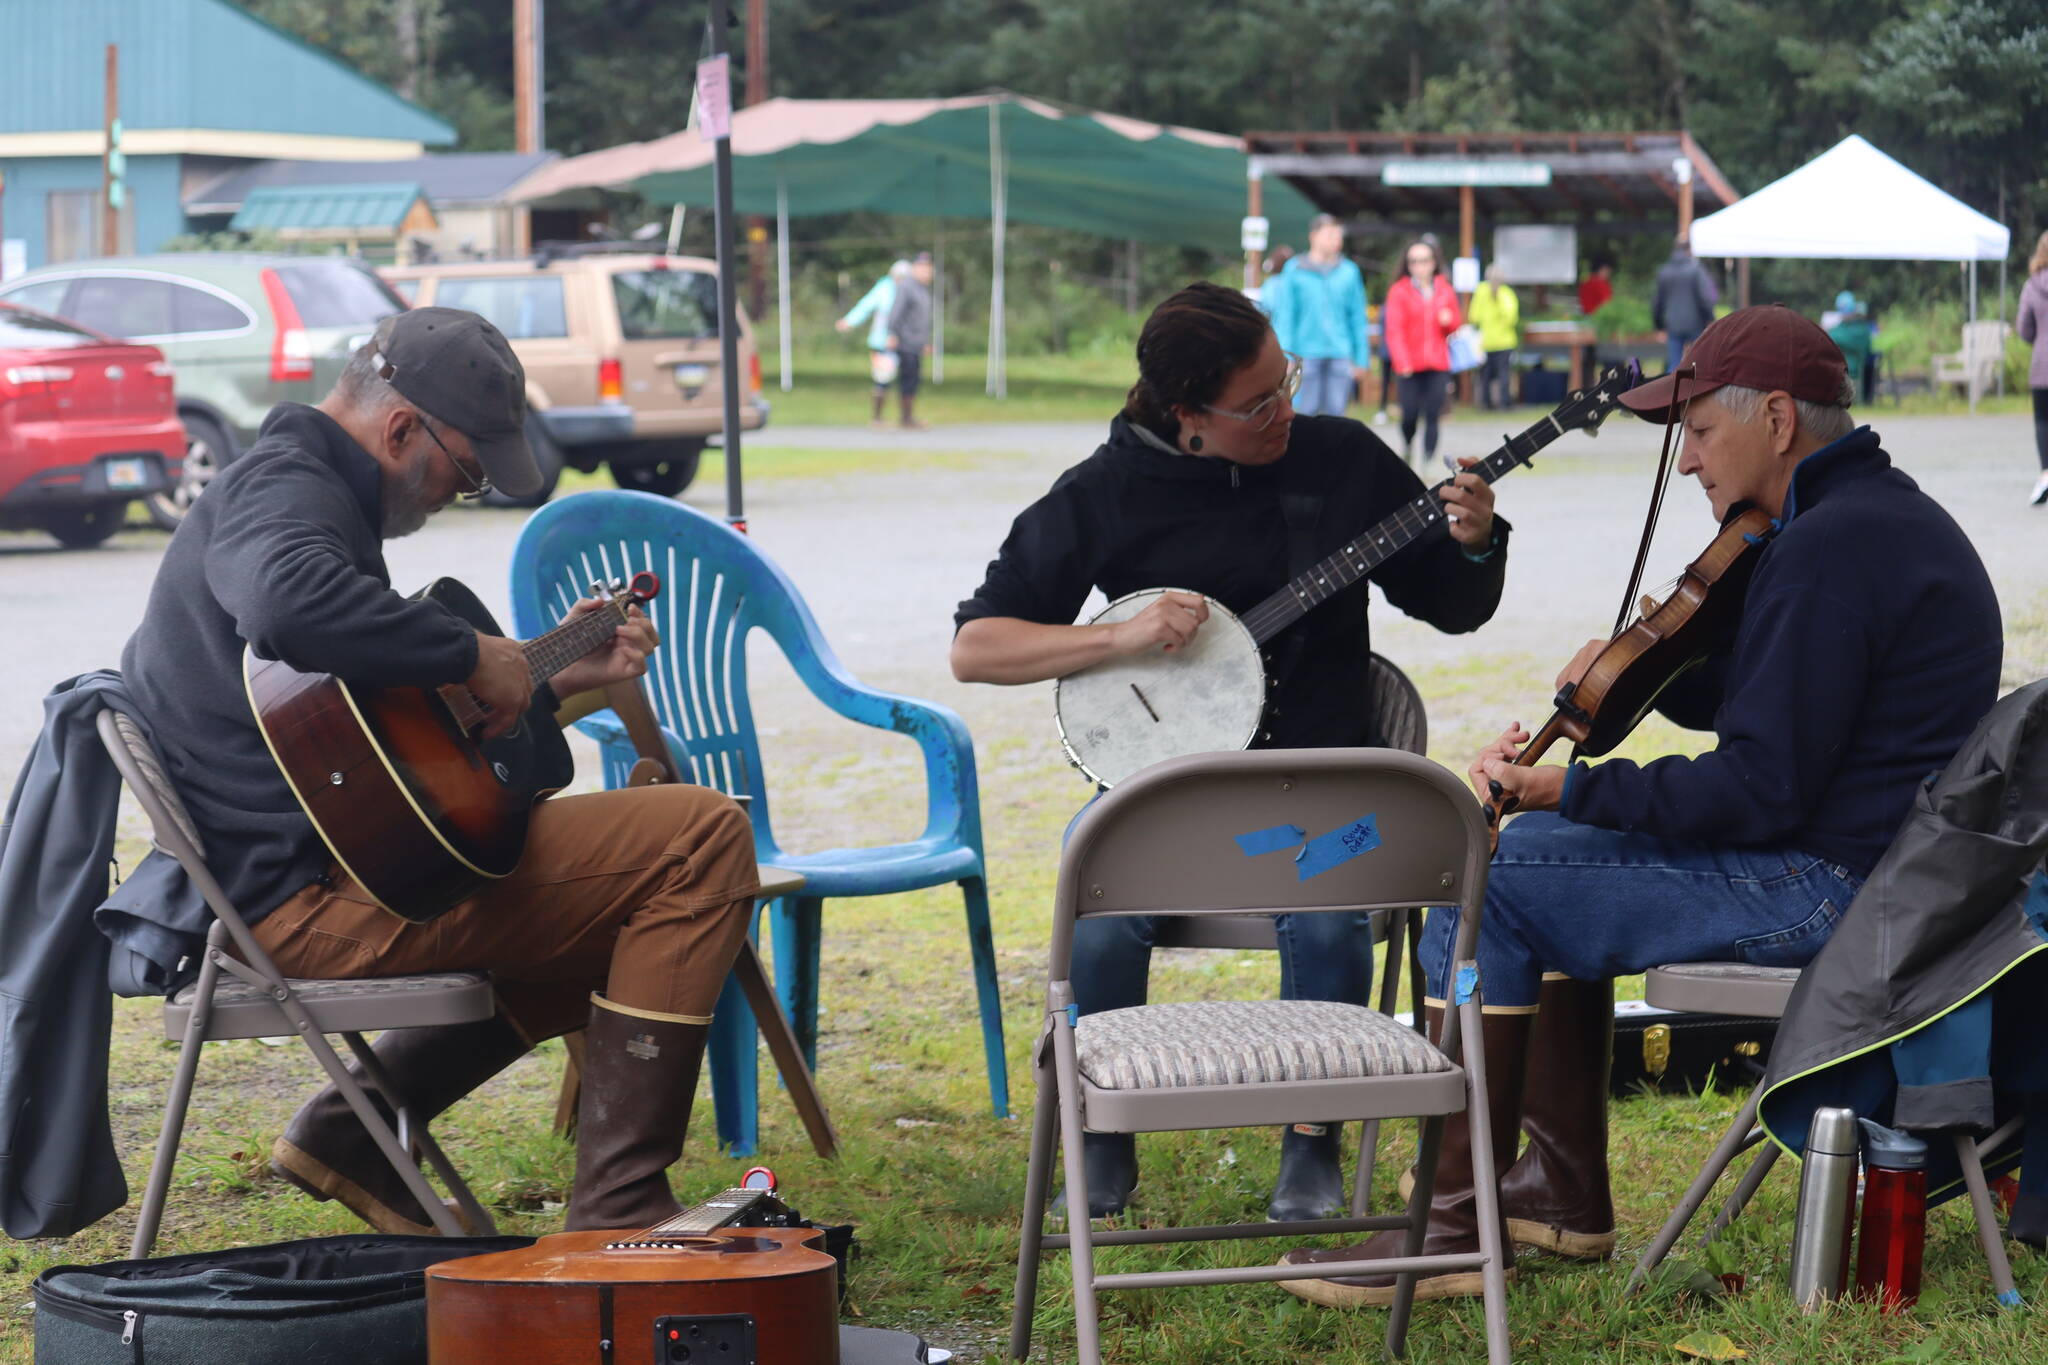 From left to right, Chris Mead on guitar, Devin Tatro on banjo, and Tom Paul on fiddle provided hours of music on Saturday for the 28th Annual Harvest Fair on Saturday. (Jonson Kuhn / Juneau Empire)